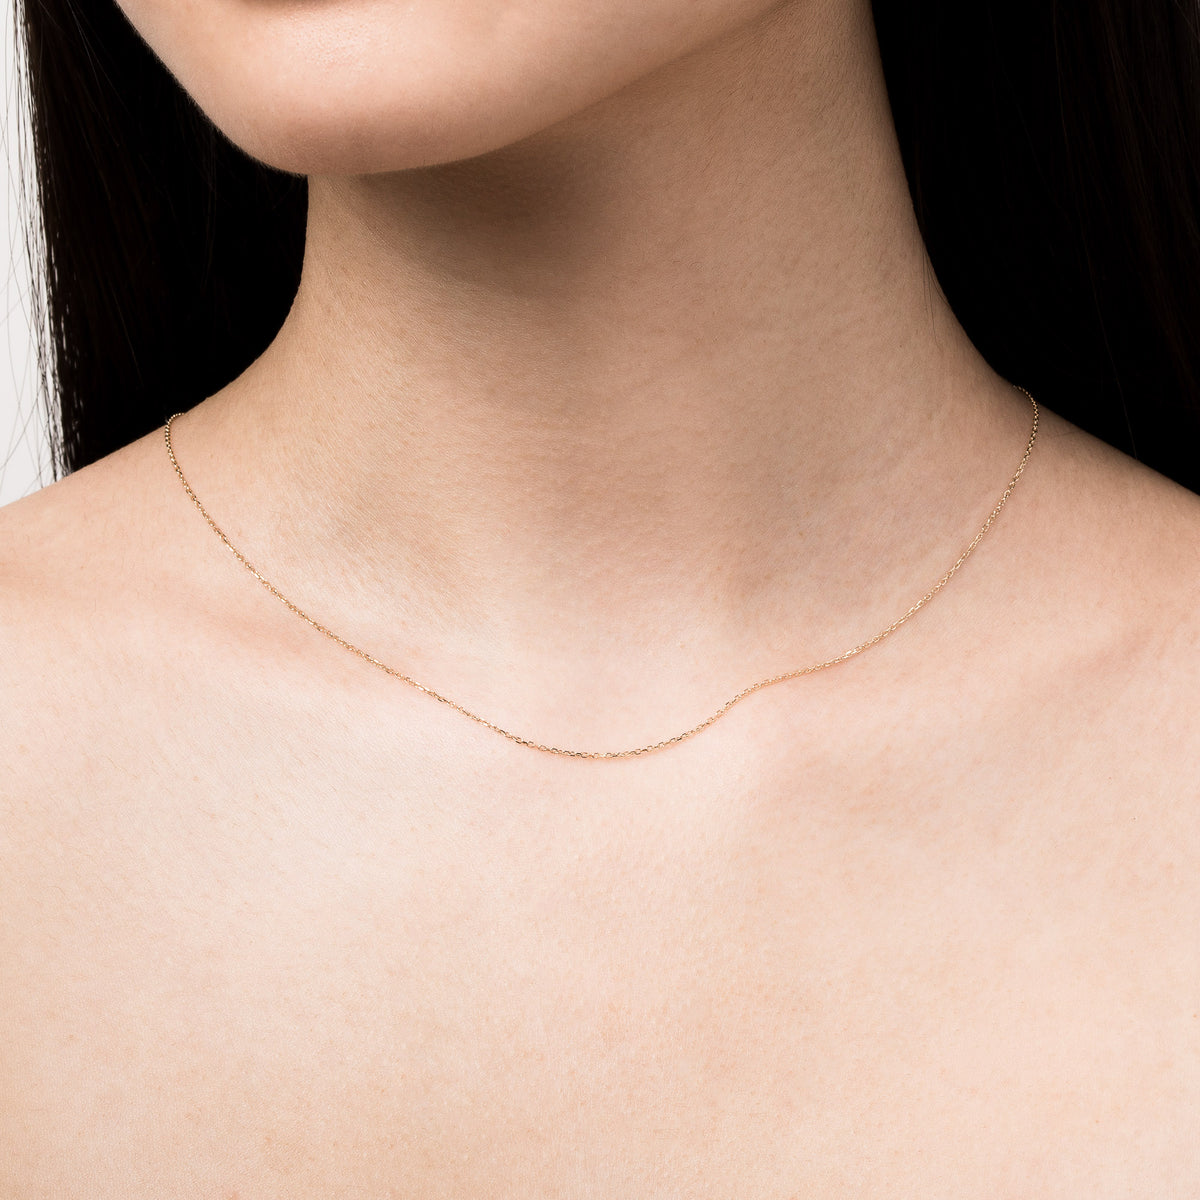 Aurate New York Small Box Chain Necklace, 18K White Gold